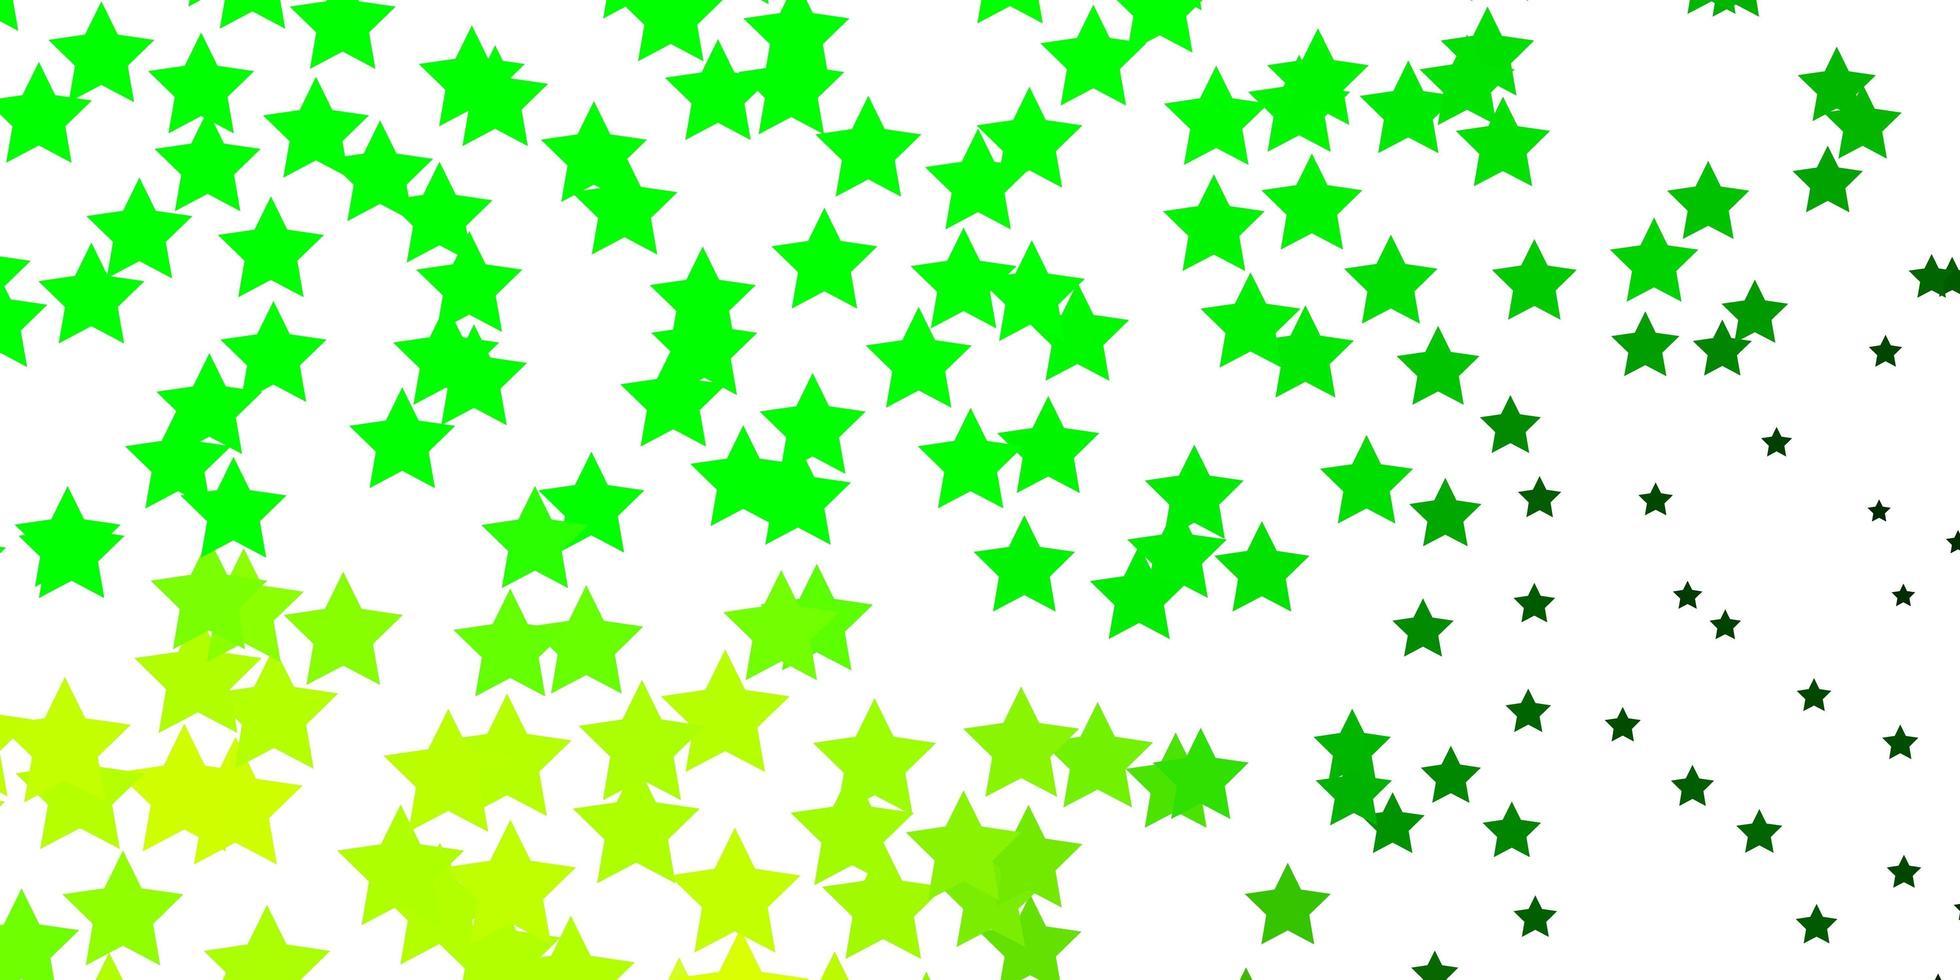 Light Green vector layout with bright stars. Colorful illustration in abstract style with gradient stars. Best design for your ad, poster, banner.